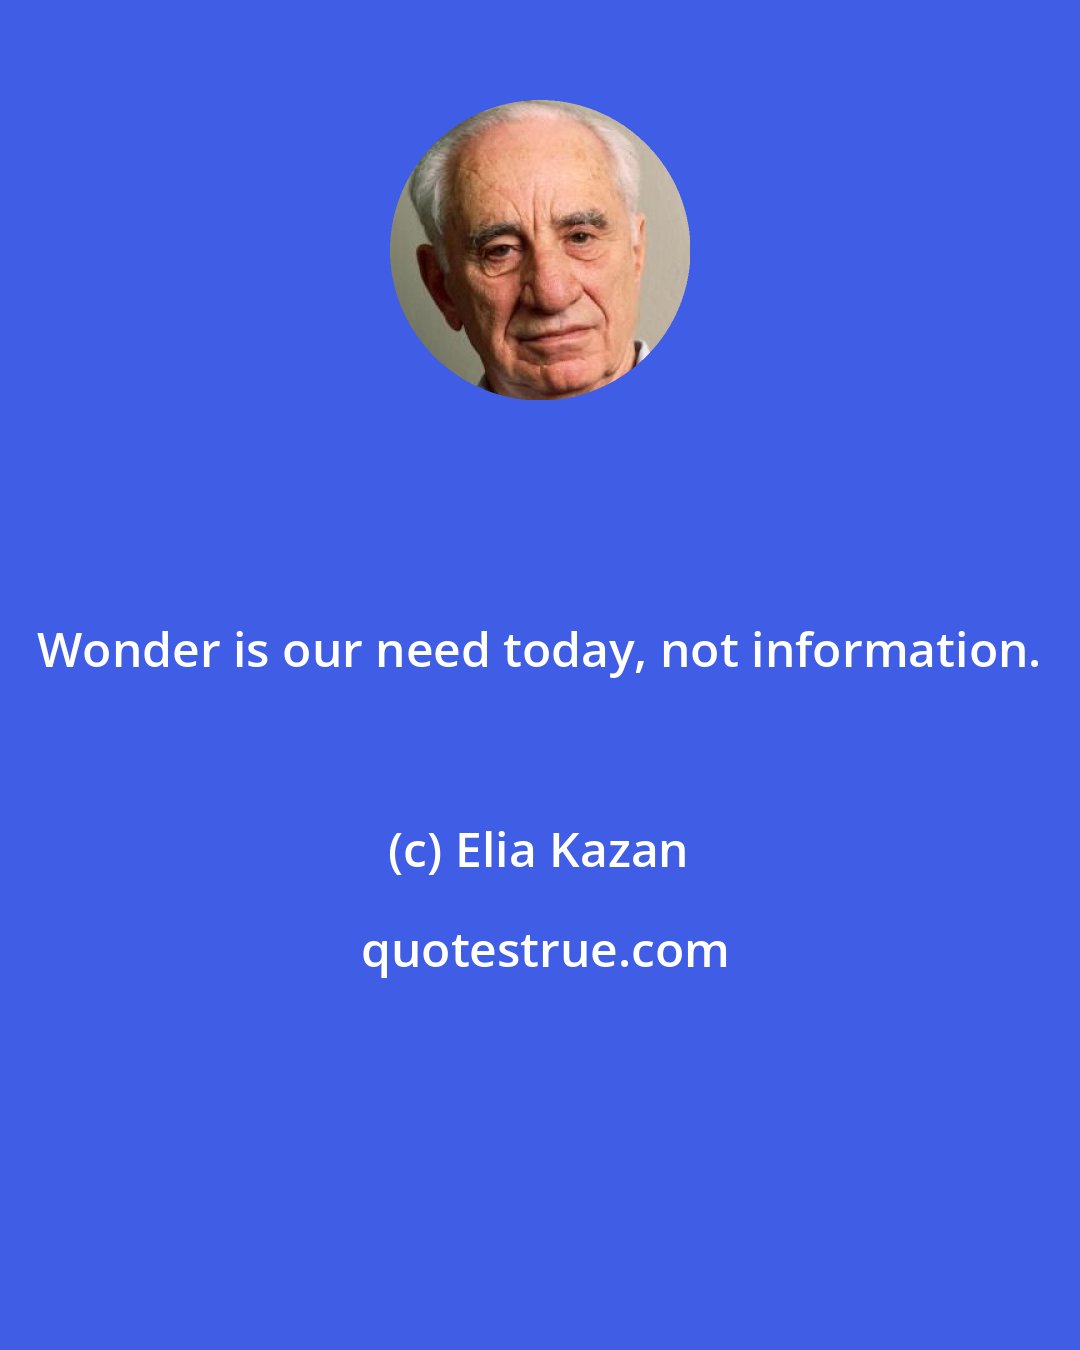 Elia Kazan: Wonder is our need today, not information.